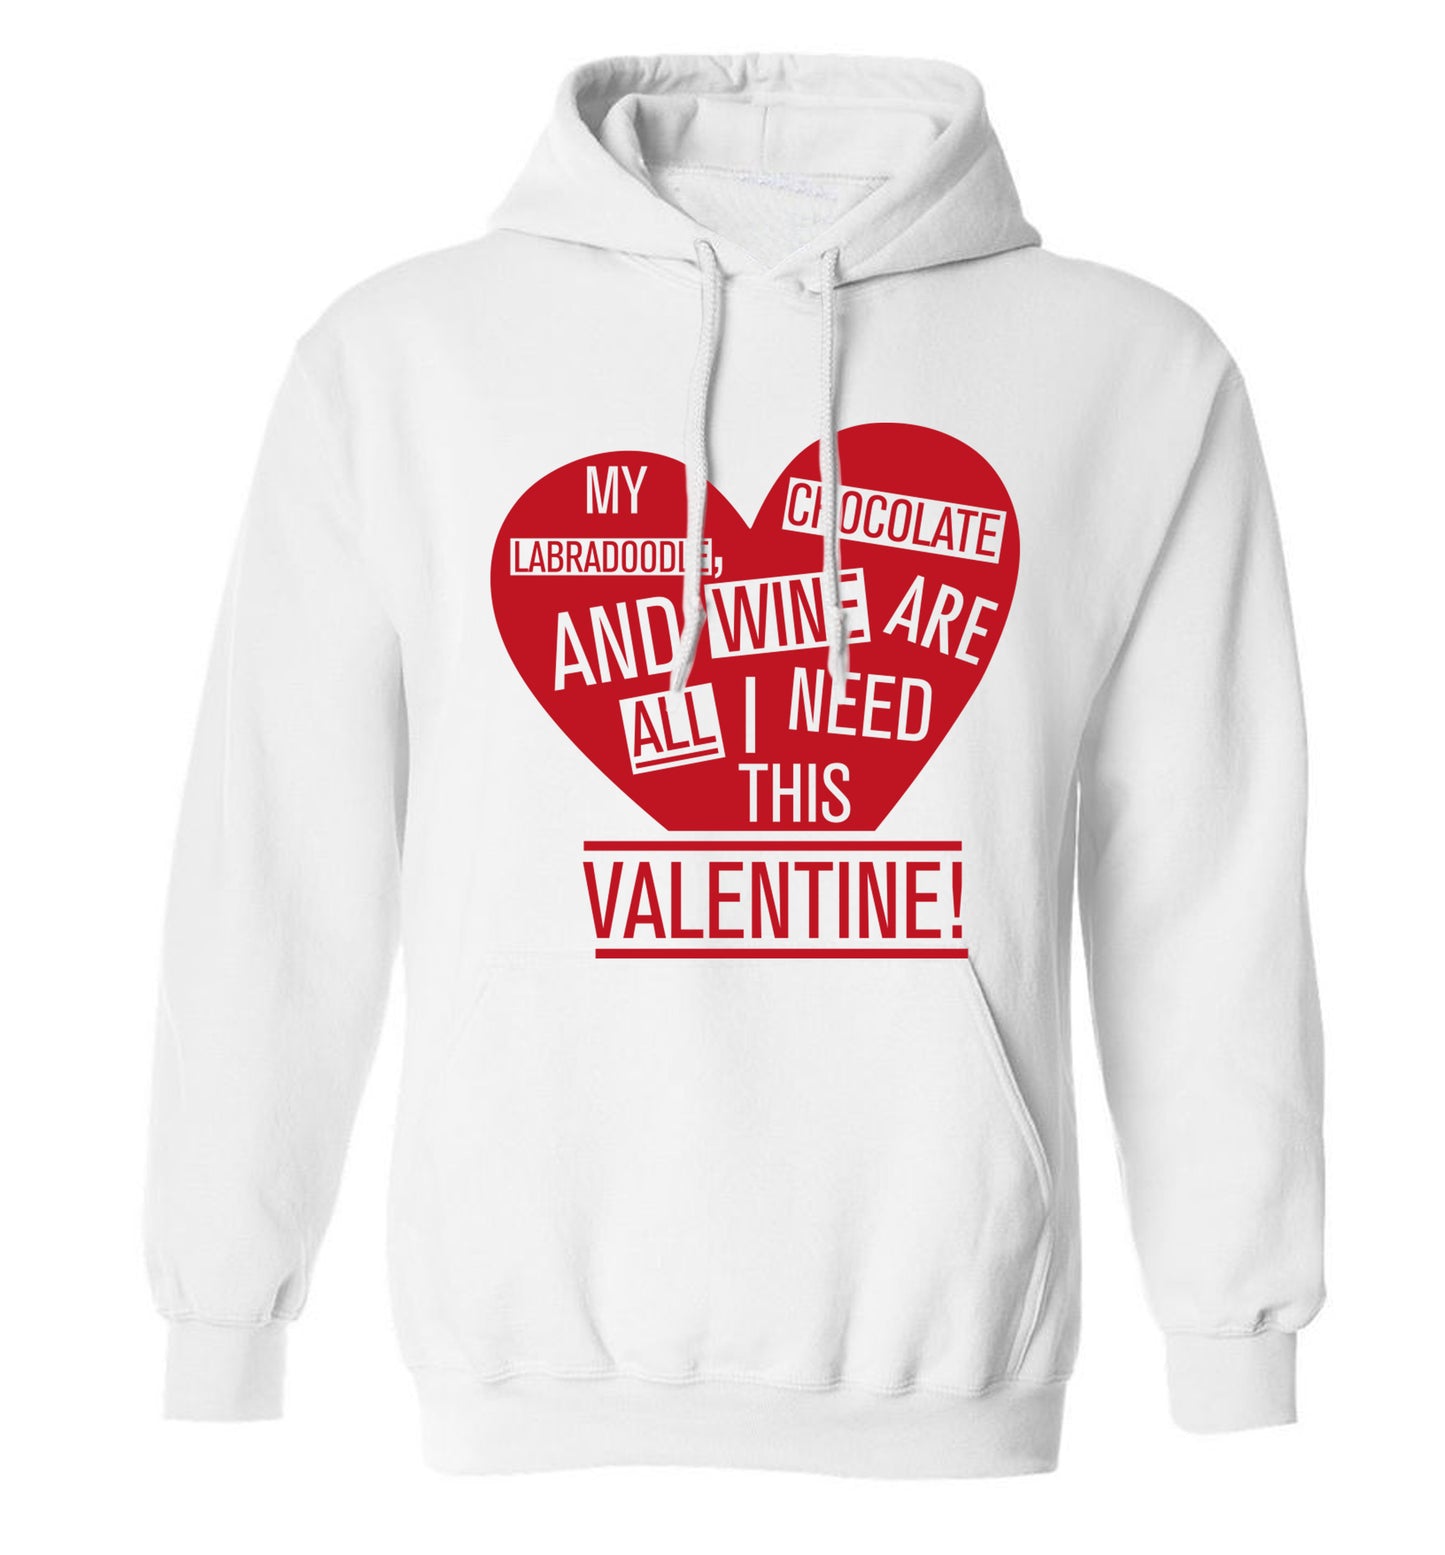 My labradoodle, chocolate and wine are all I need this valentine! adults unisex white hoodie 2XL